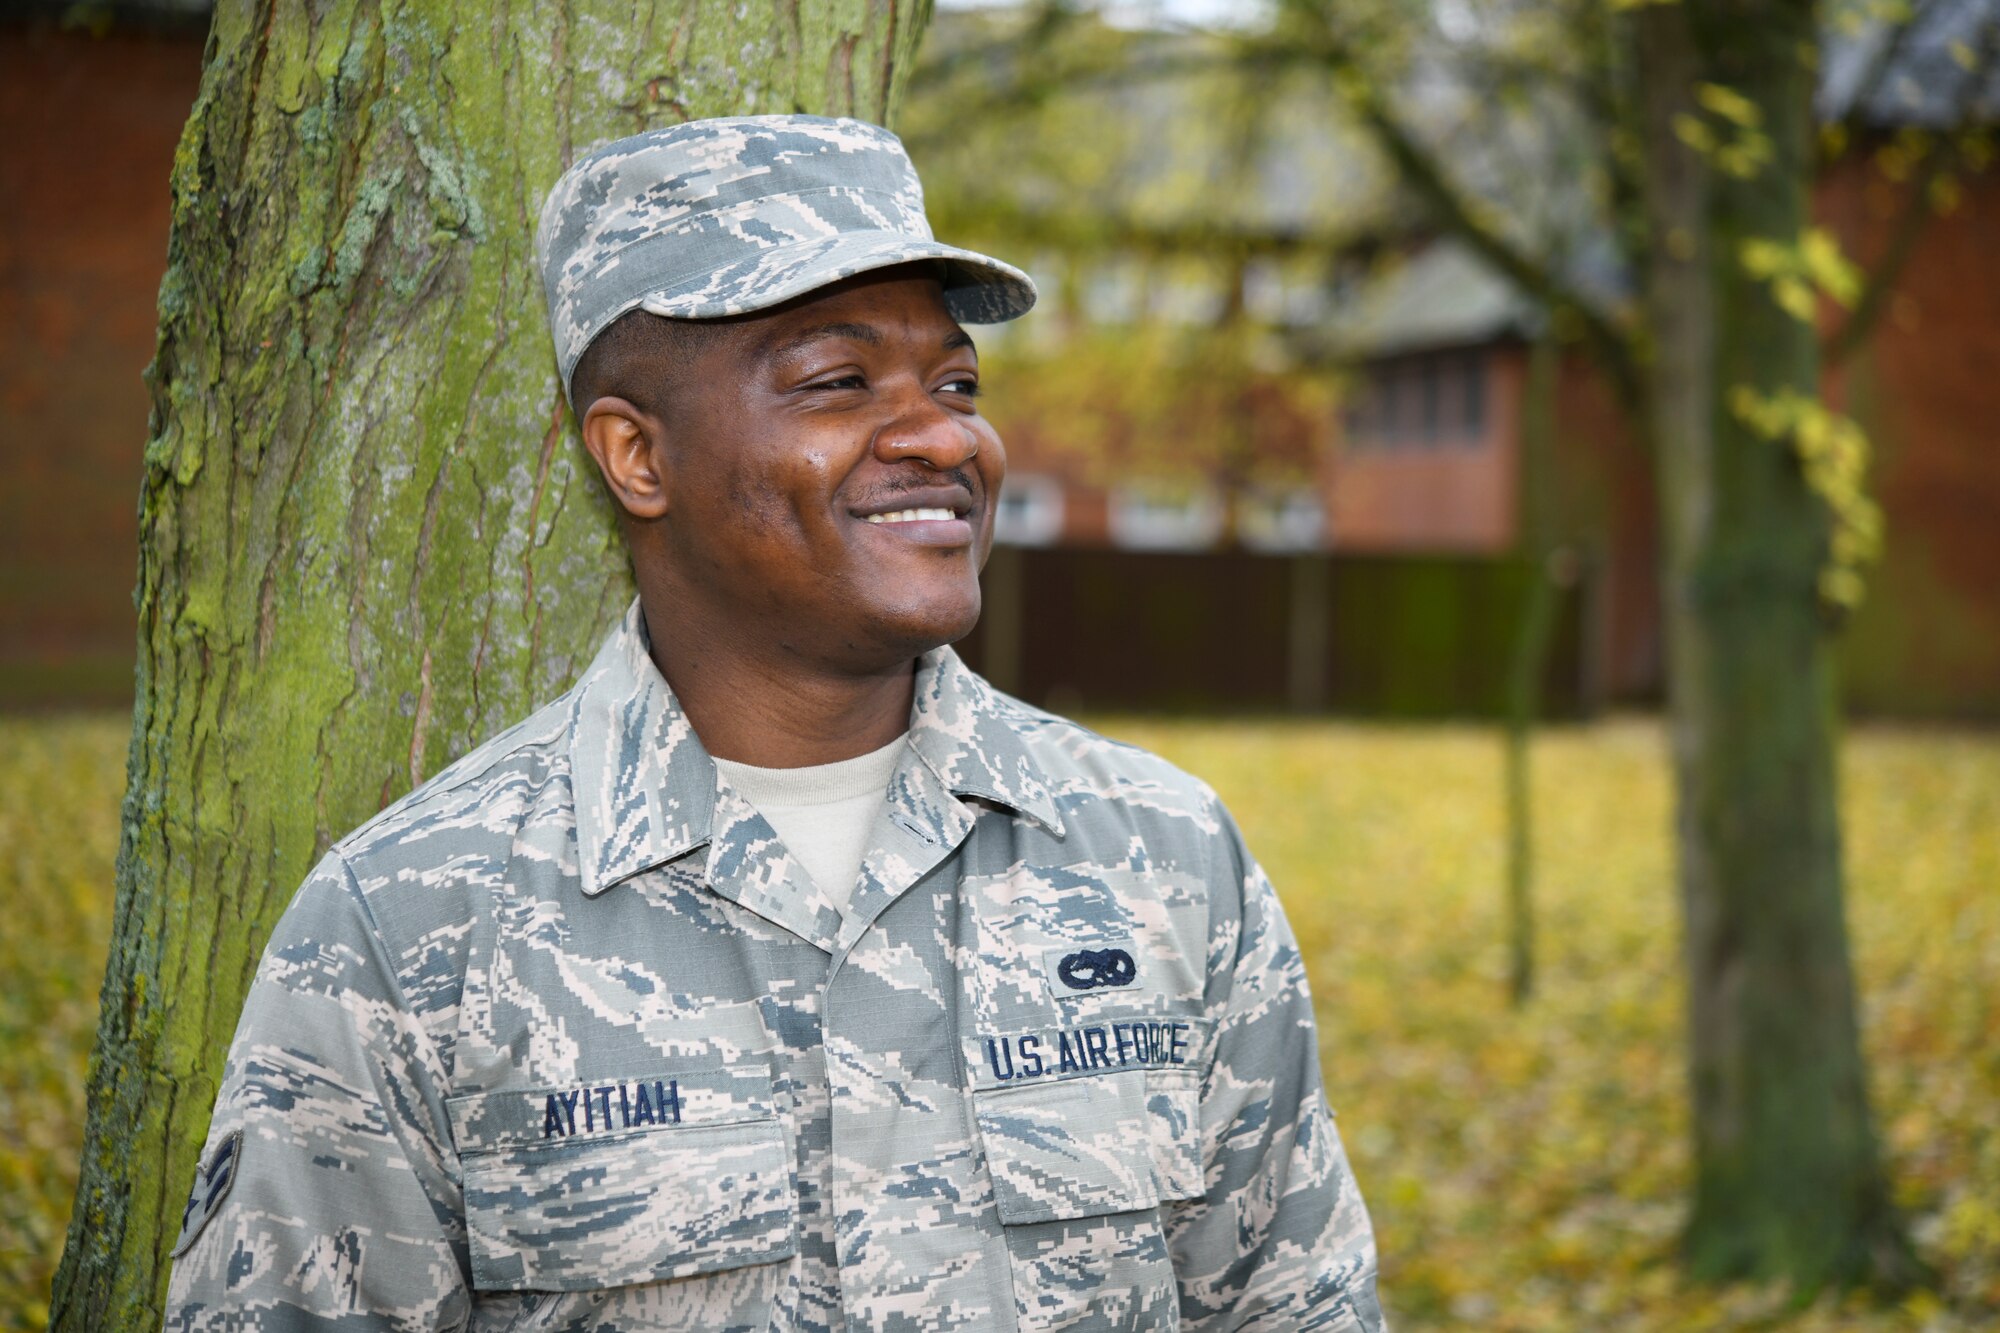 U.S. Air Force Airman 1st Class Micheal Ayitiah, 100th Maintenance Squadron crew chief, poses for a photo at RAF Mildenhall, England, Nov. 26, 2019. Ayitiah was 24 when he emigrated to where he thought he could achieve his dream– America. (U.S. Air Force photo by Senior Airman Alexandria Lee)